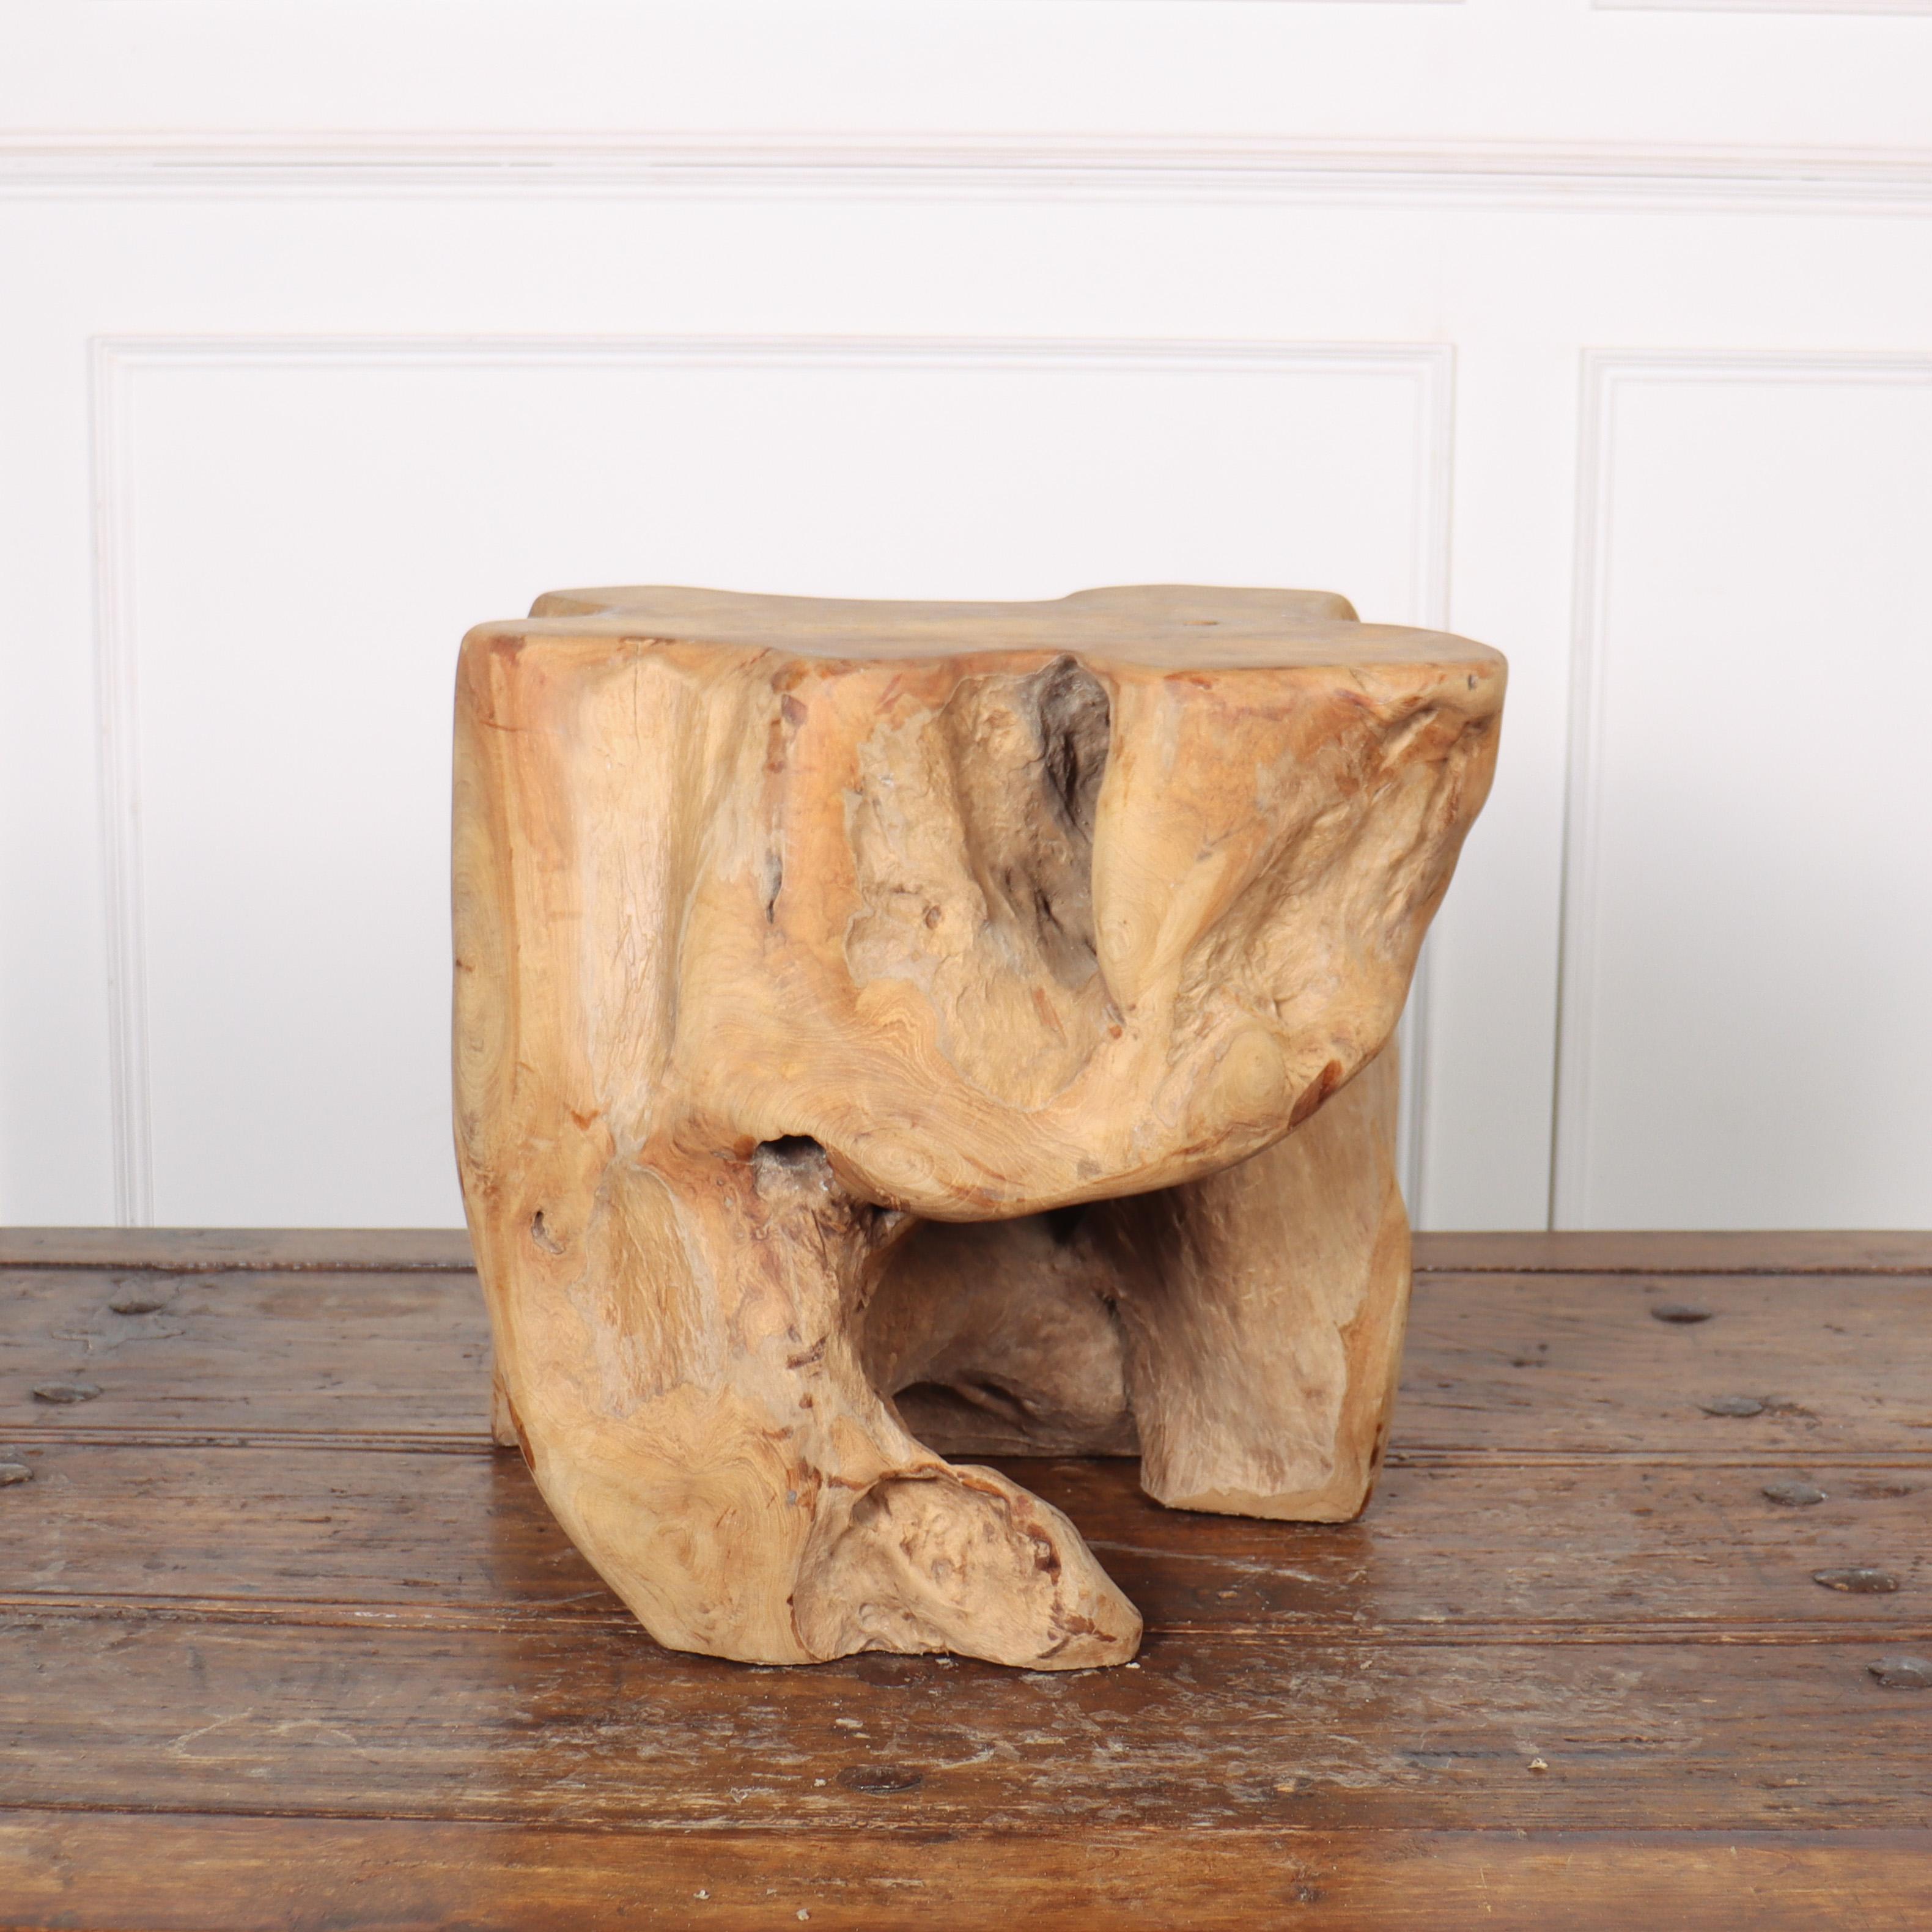 Sculptural rustic root side table.

Ref: E.

Reference: 8148

Dimensions
19 inches (48 cms) High
22 inches (56 cms) Diameter